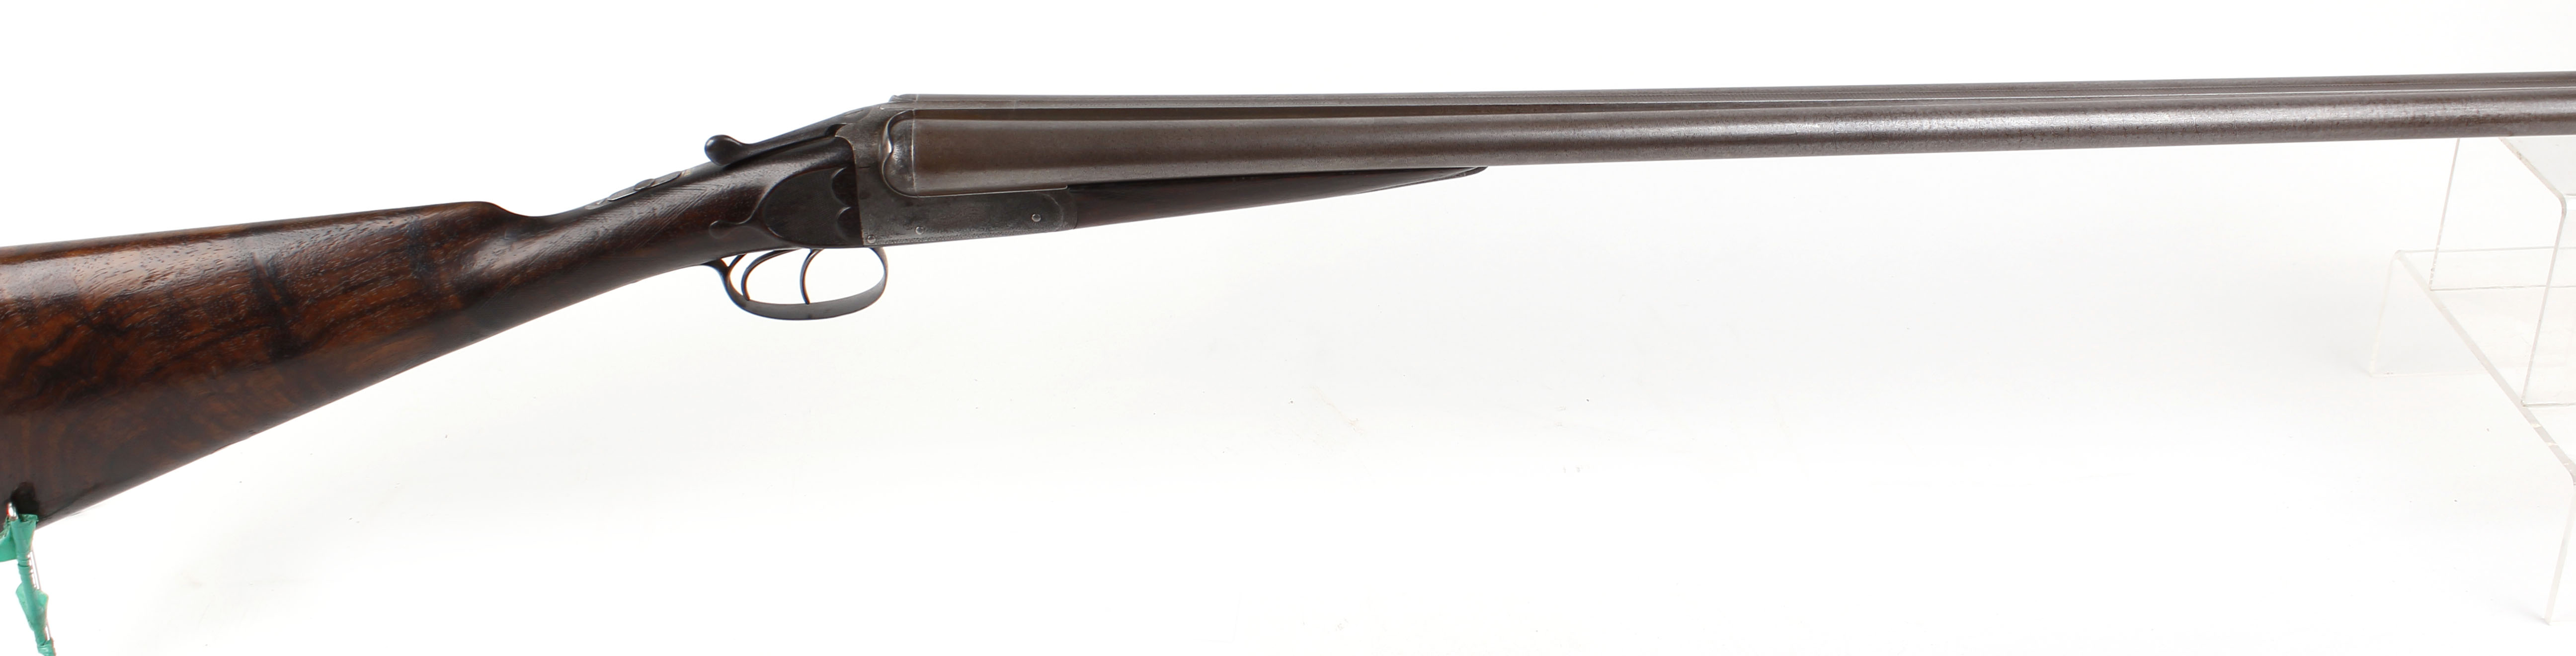 12 bore boxlock ejector by Boswell, 30 ins damascus barrels (nitro proof), raised engine turned - Image 4 of 6